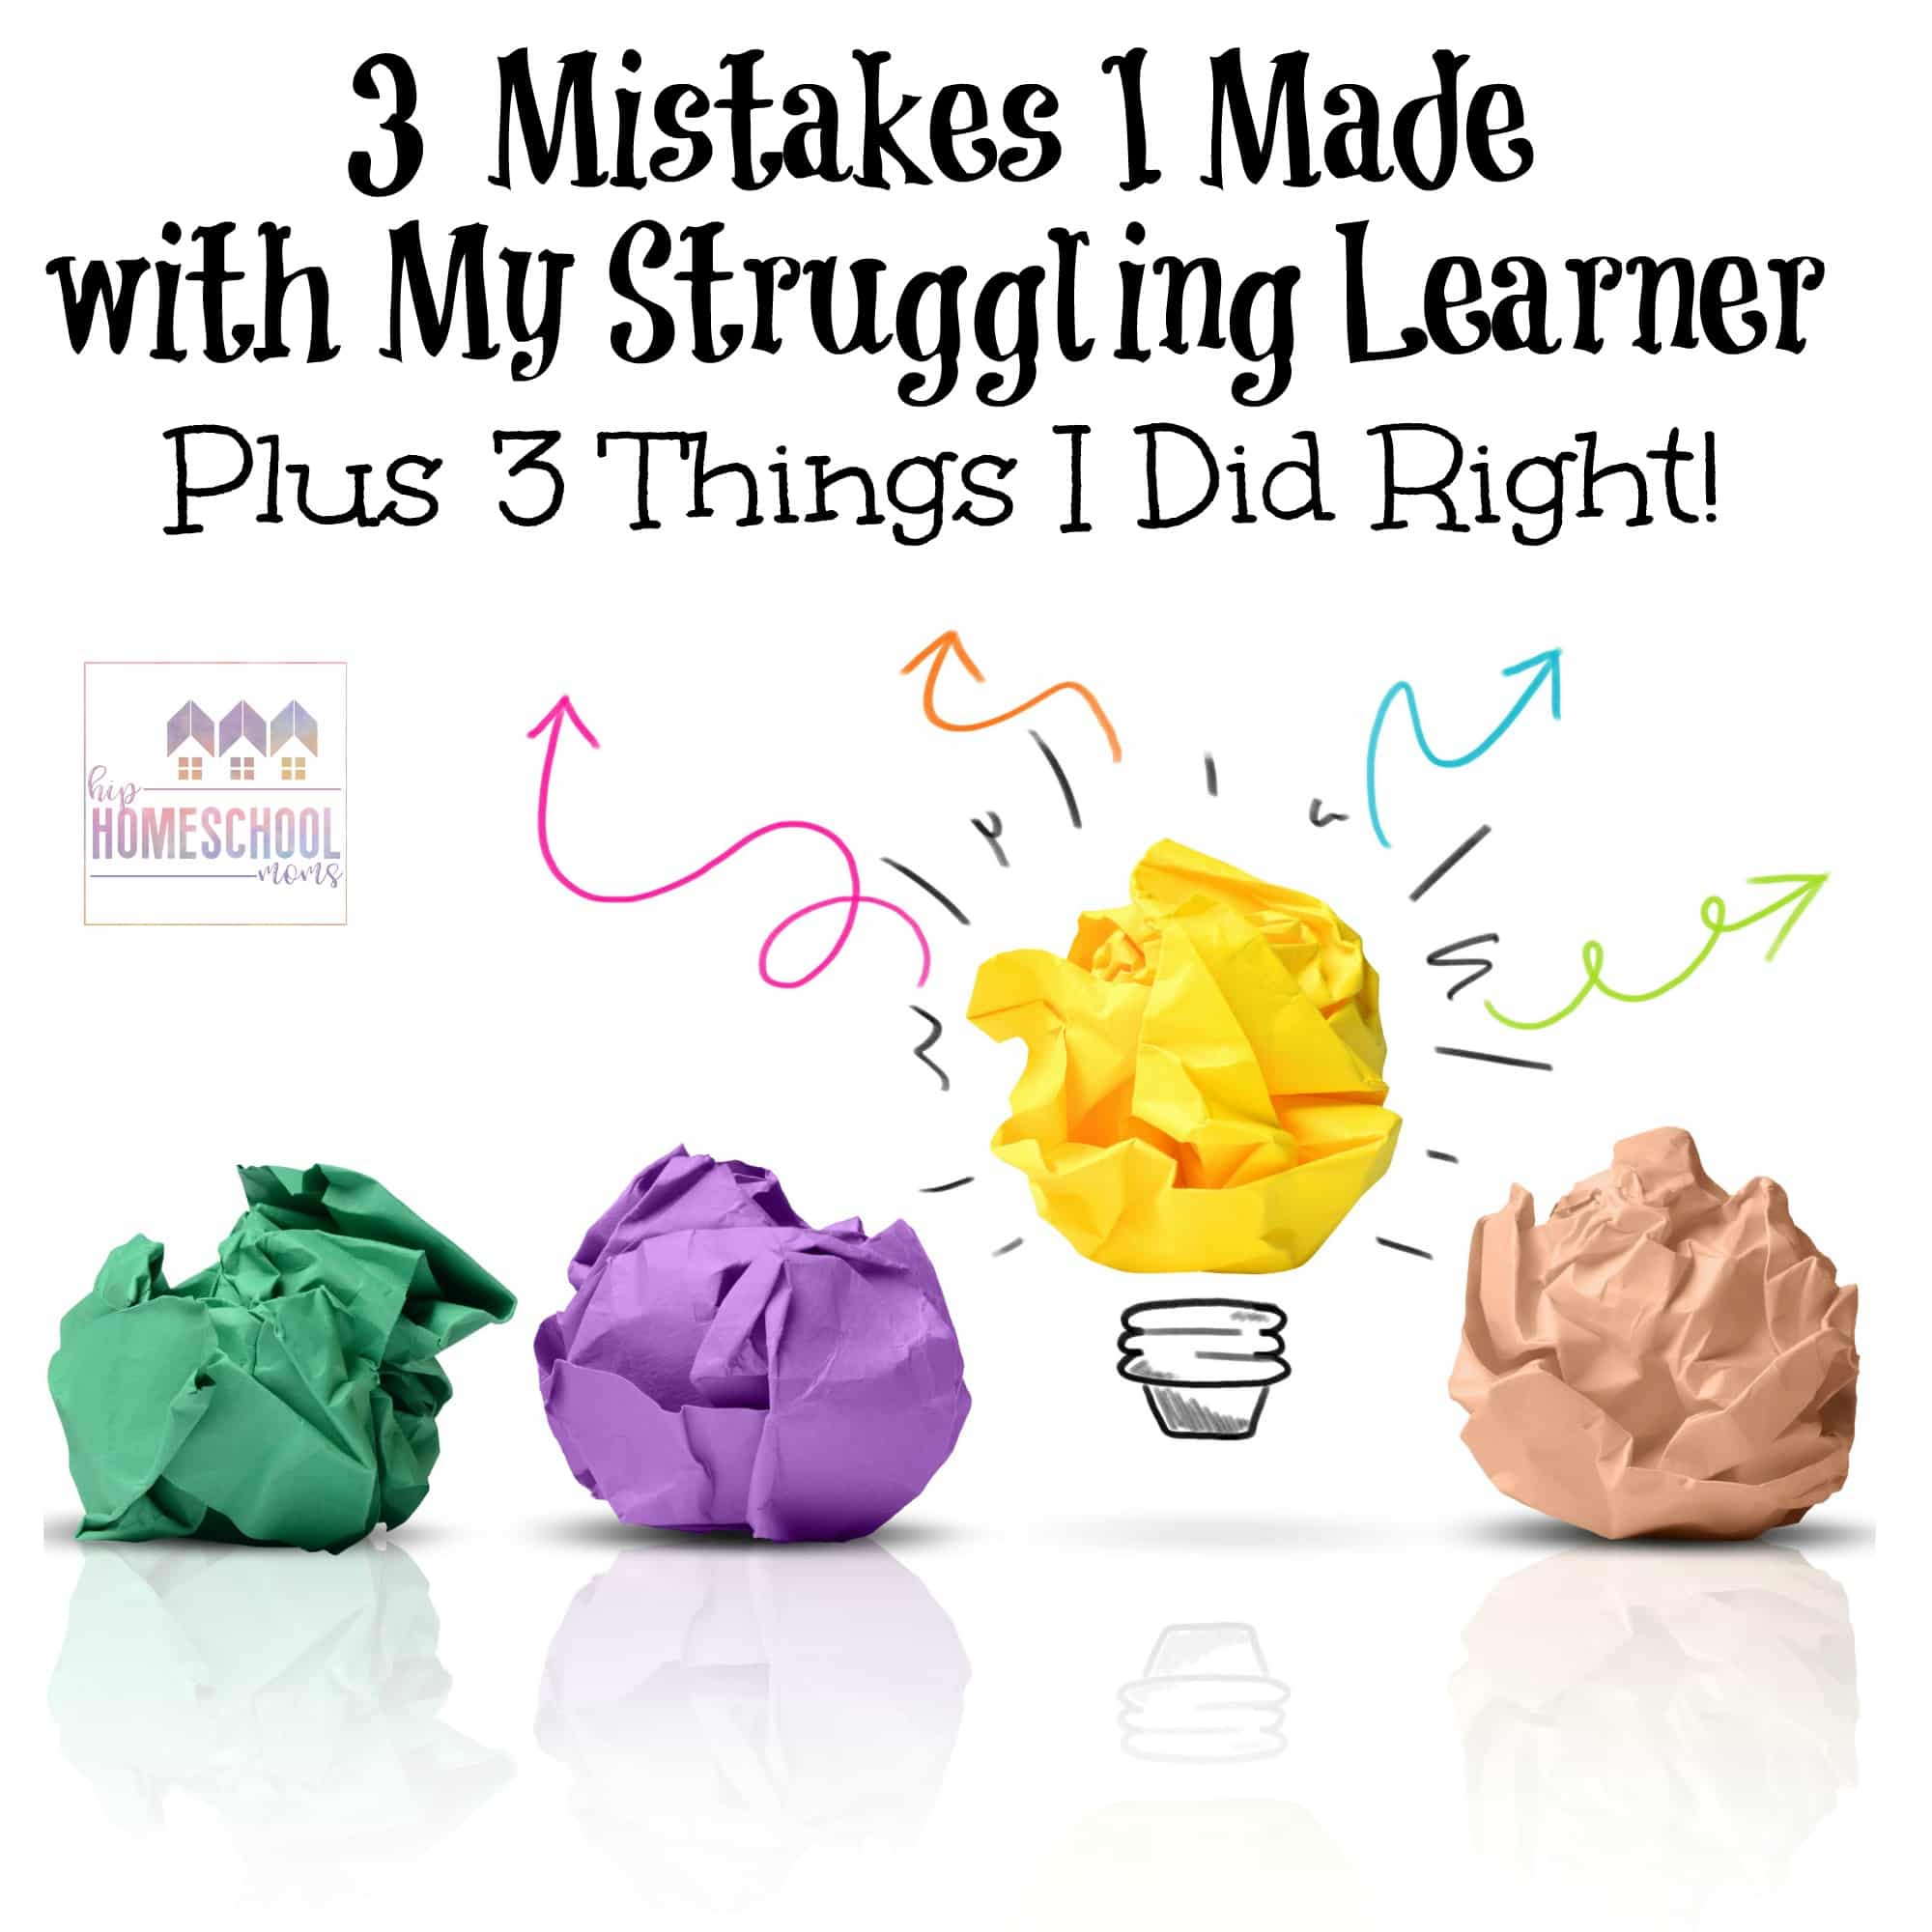 3 Mistakes I Made with My Struggling Learner (Plus 3 Things I Did Right!)